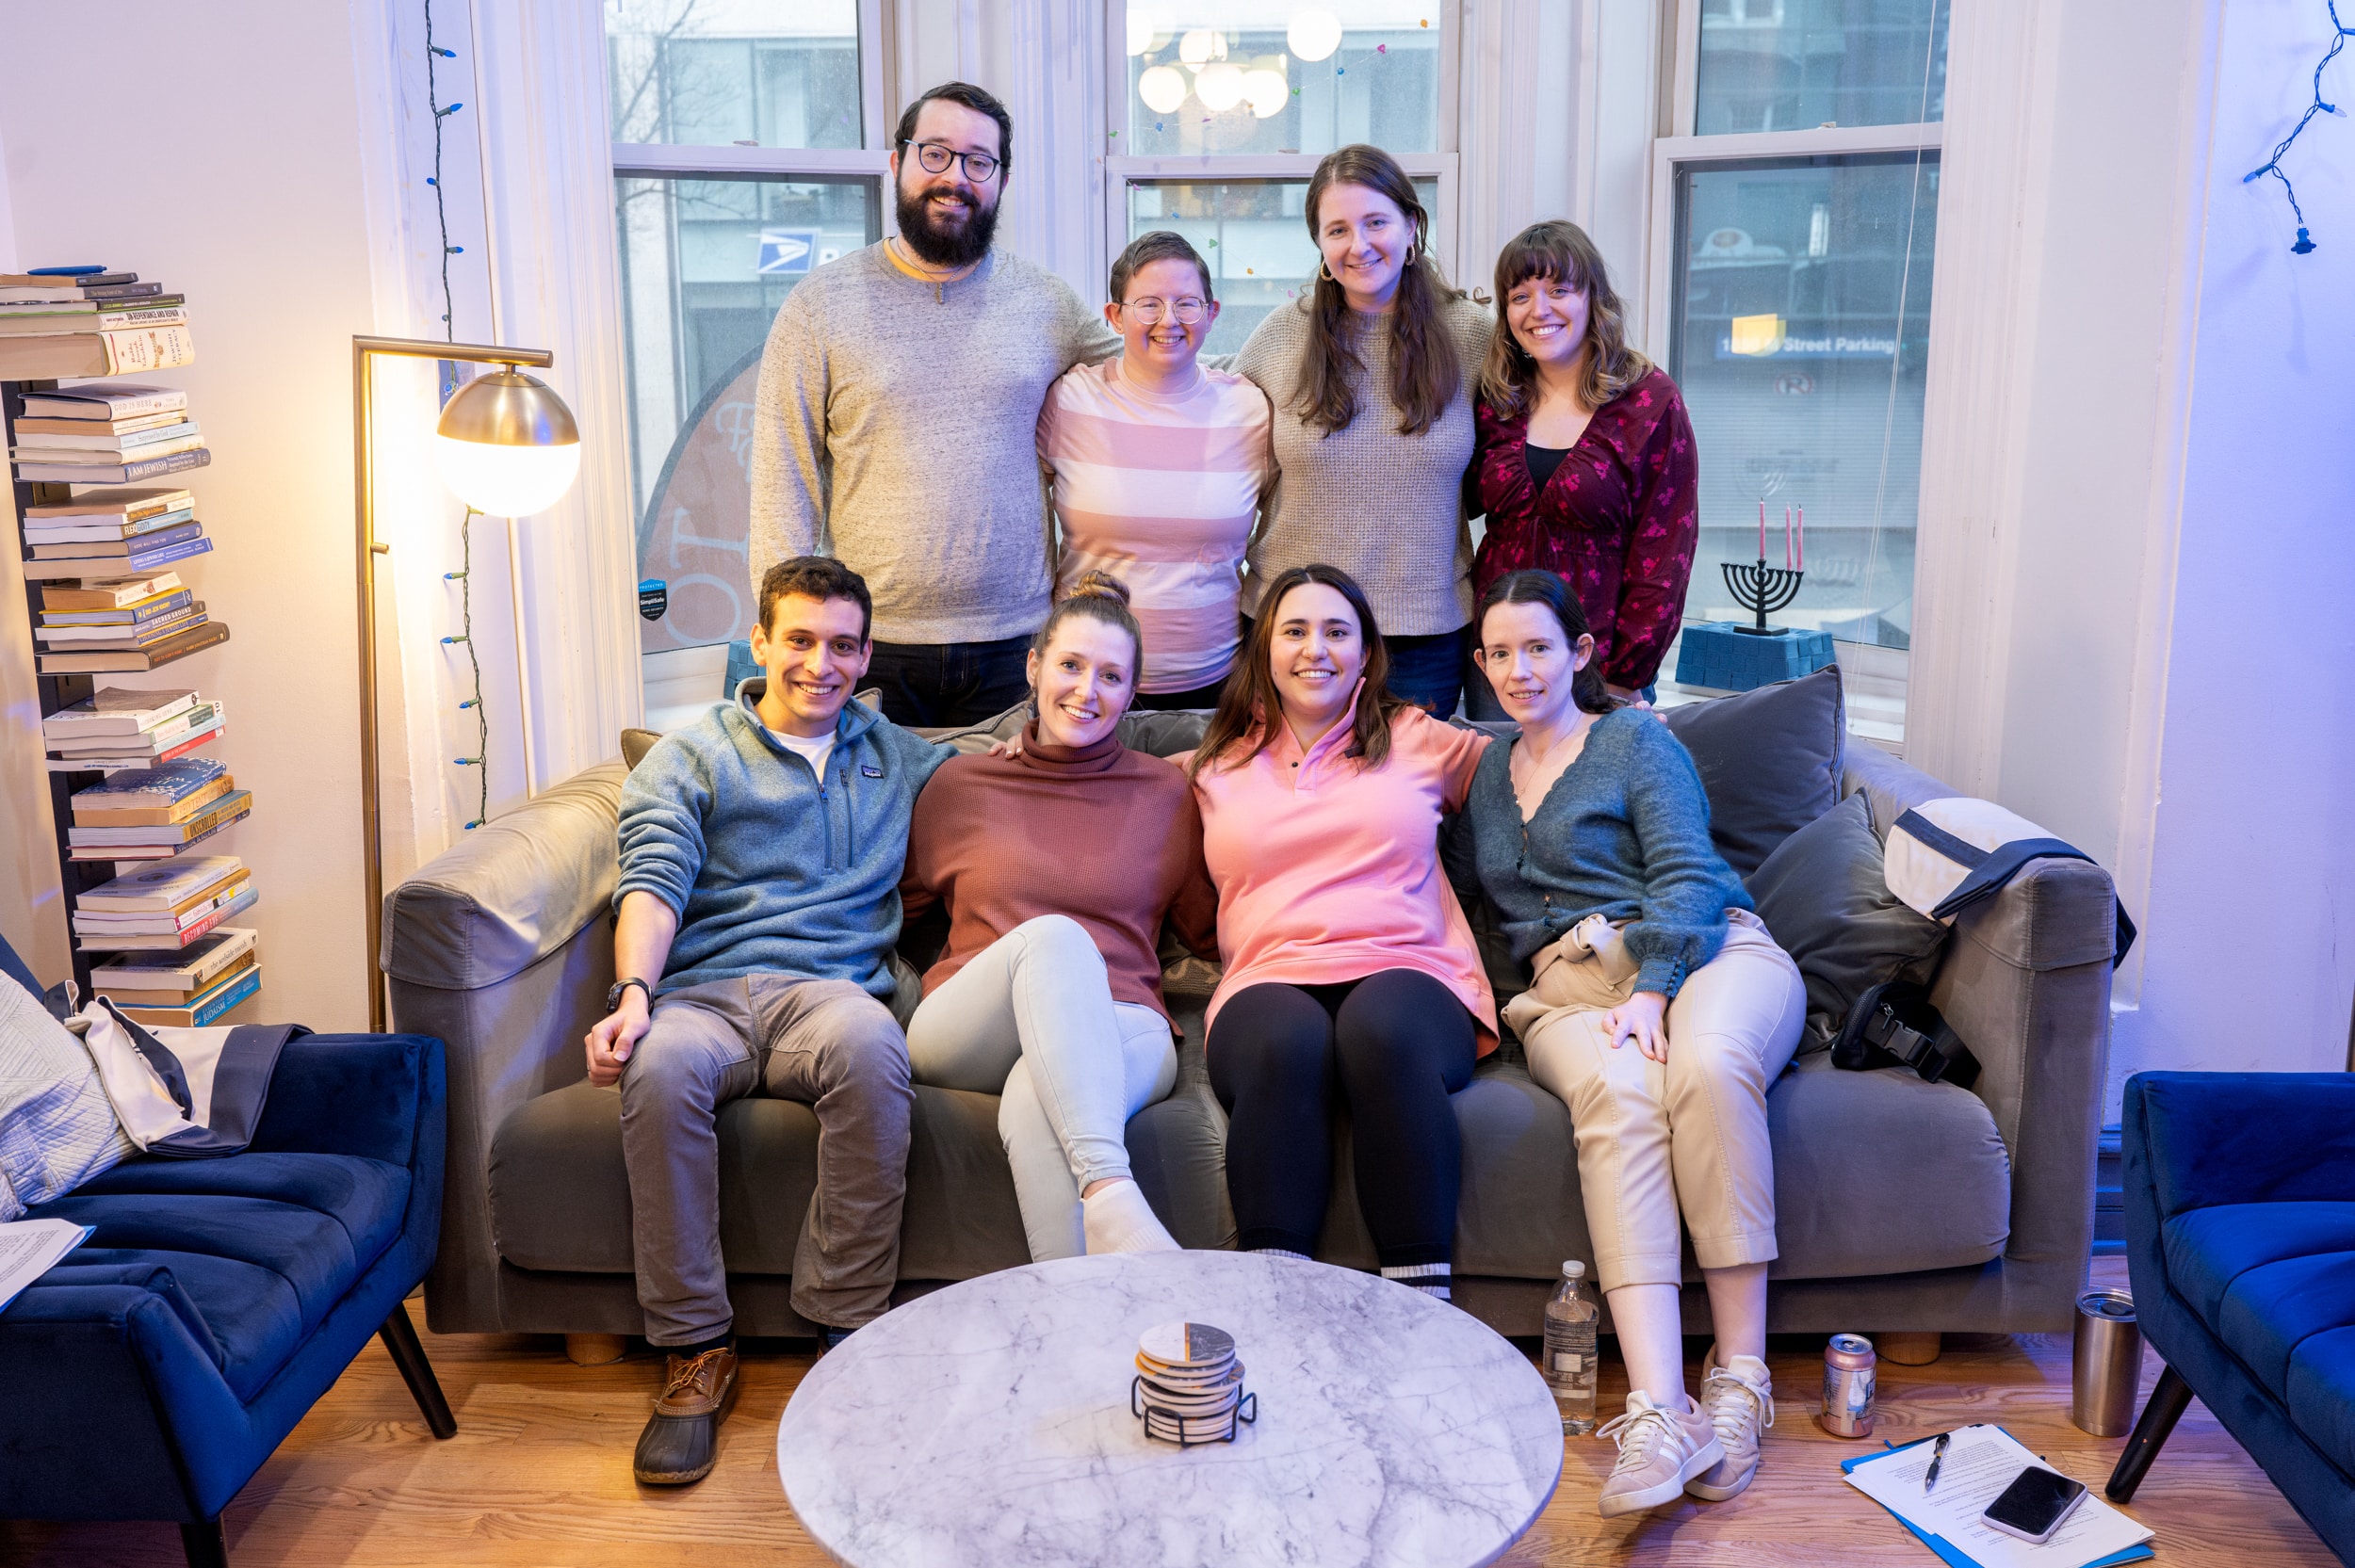 The Open Doors Fellows sit together on a couch in Gather's townhouse.